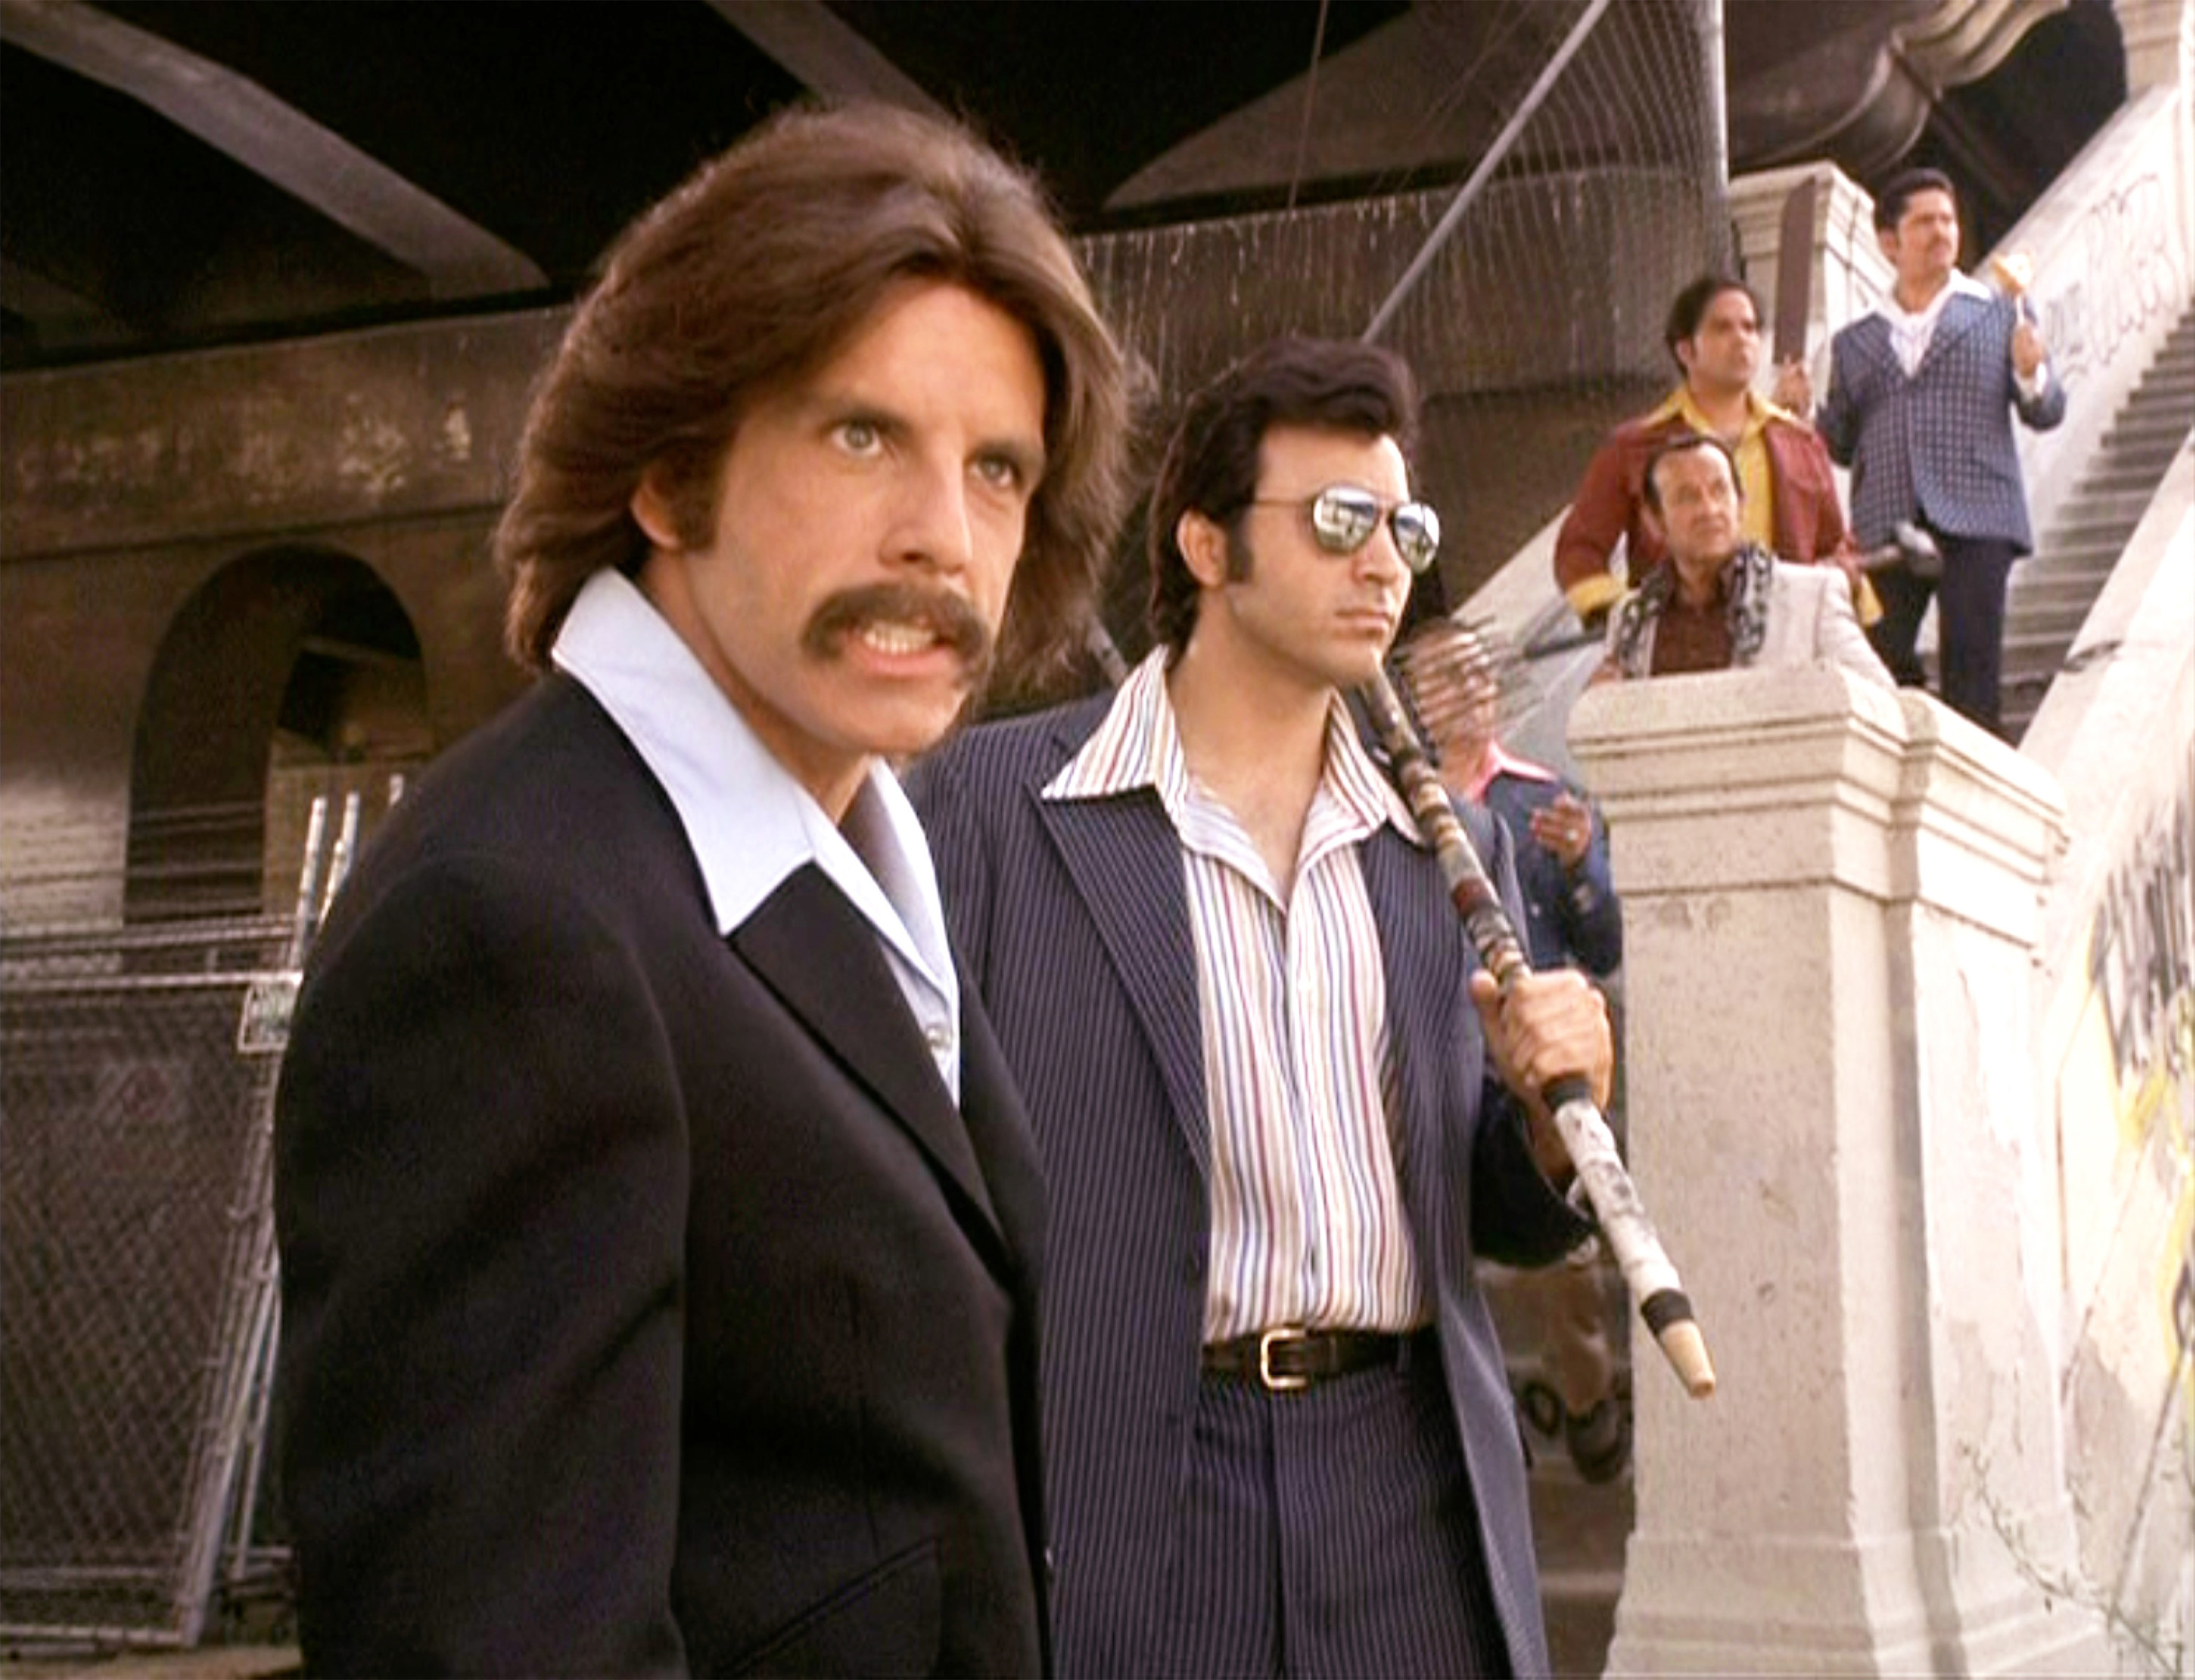 The movie &quot;Anchorman: The Legend of Ron Burgundy&quot;, directed by Adam McKay